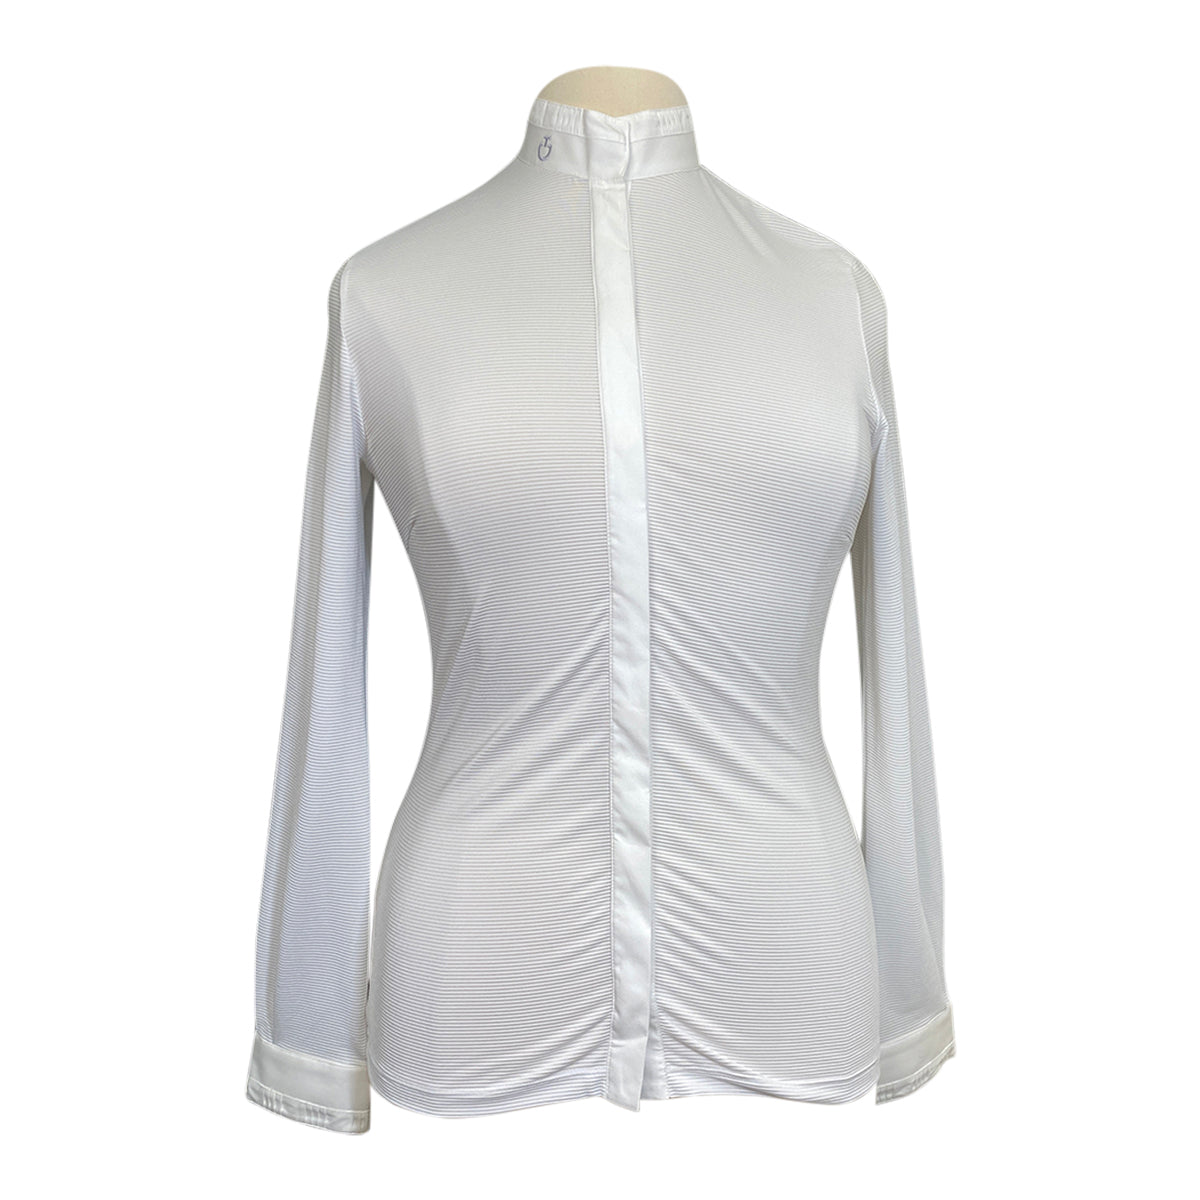 Cavalleria Toscana Alternating Pleates Competition Shirt in White